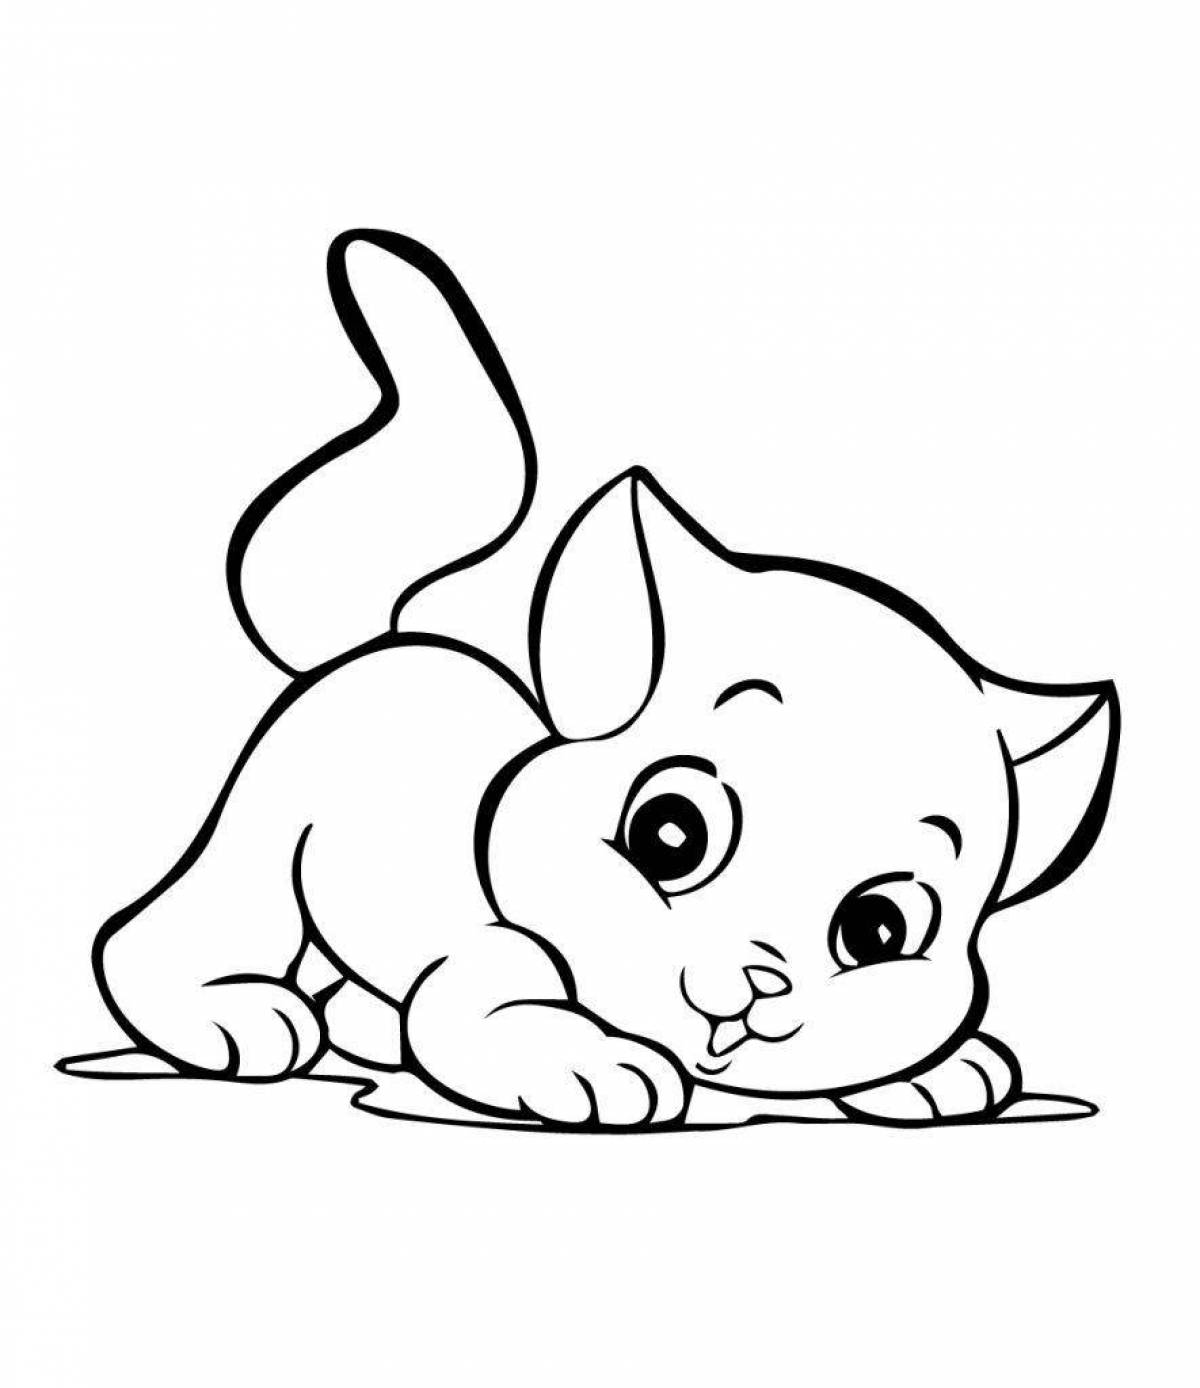 Naughty kitty coloring book for kids